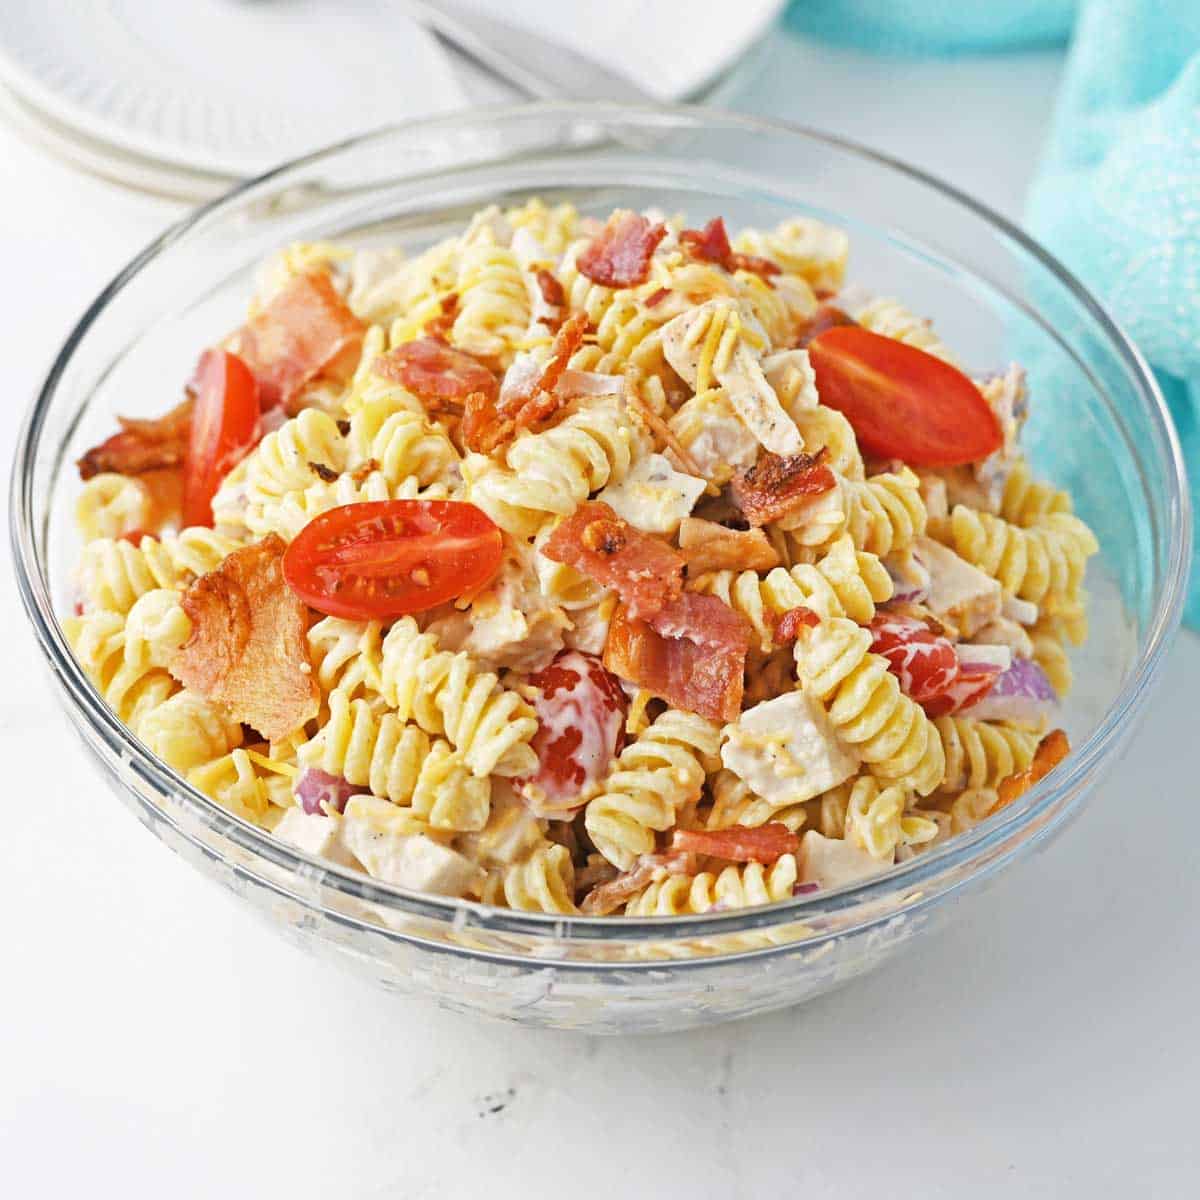 chicken bacon ranch pasta salad in glass bowl